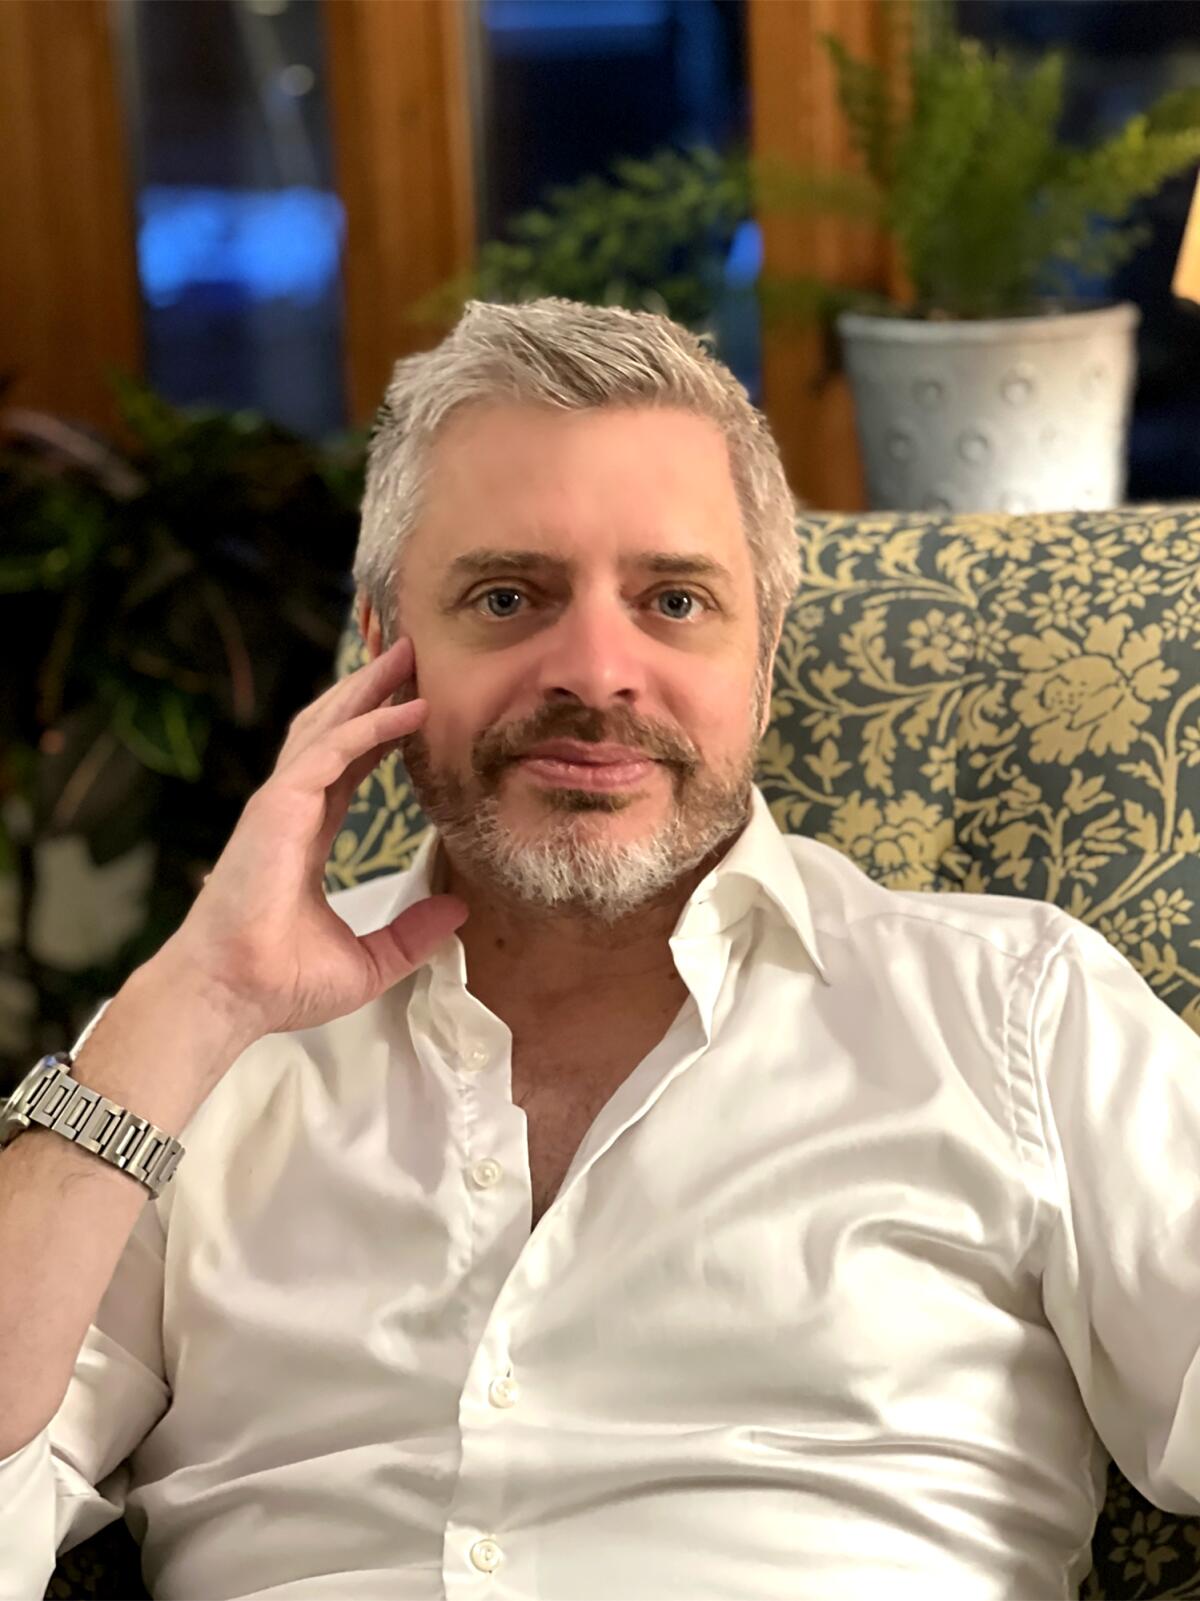 A man with a gray beard and white shirt leans his hand against his face and stares at the camera.